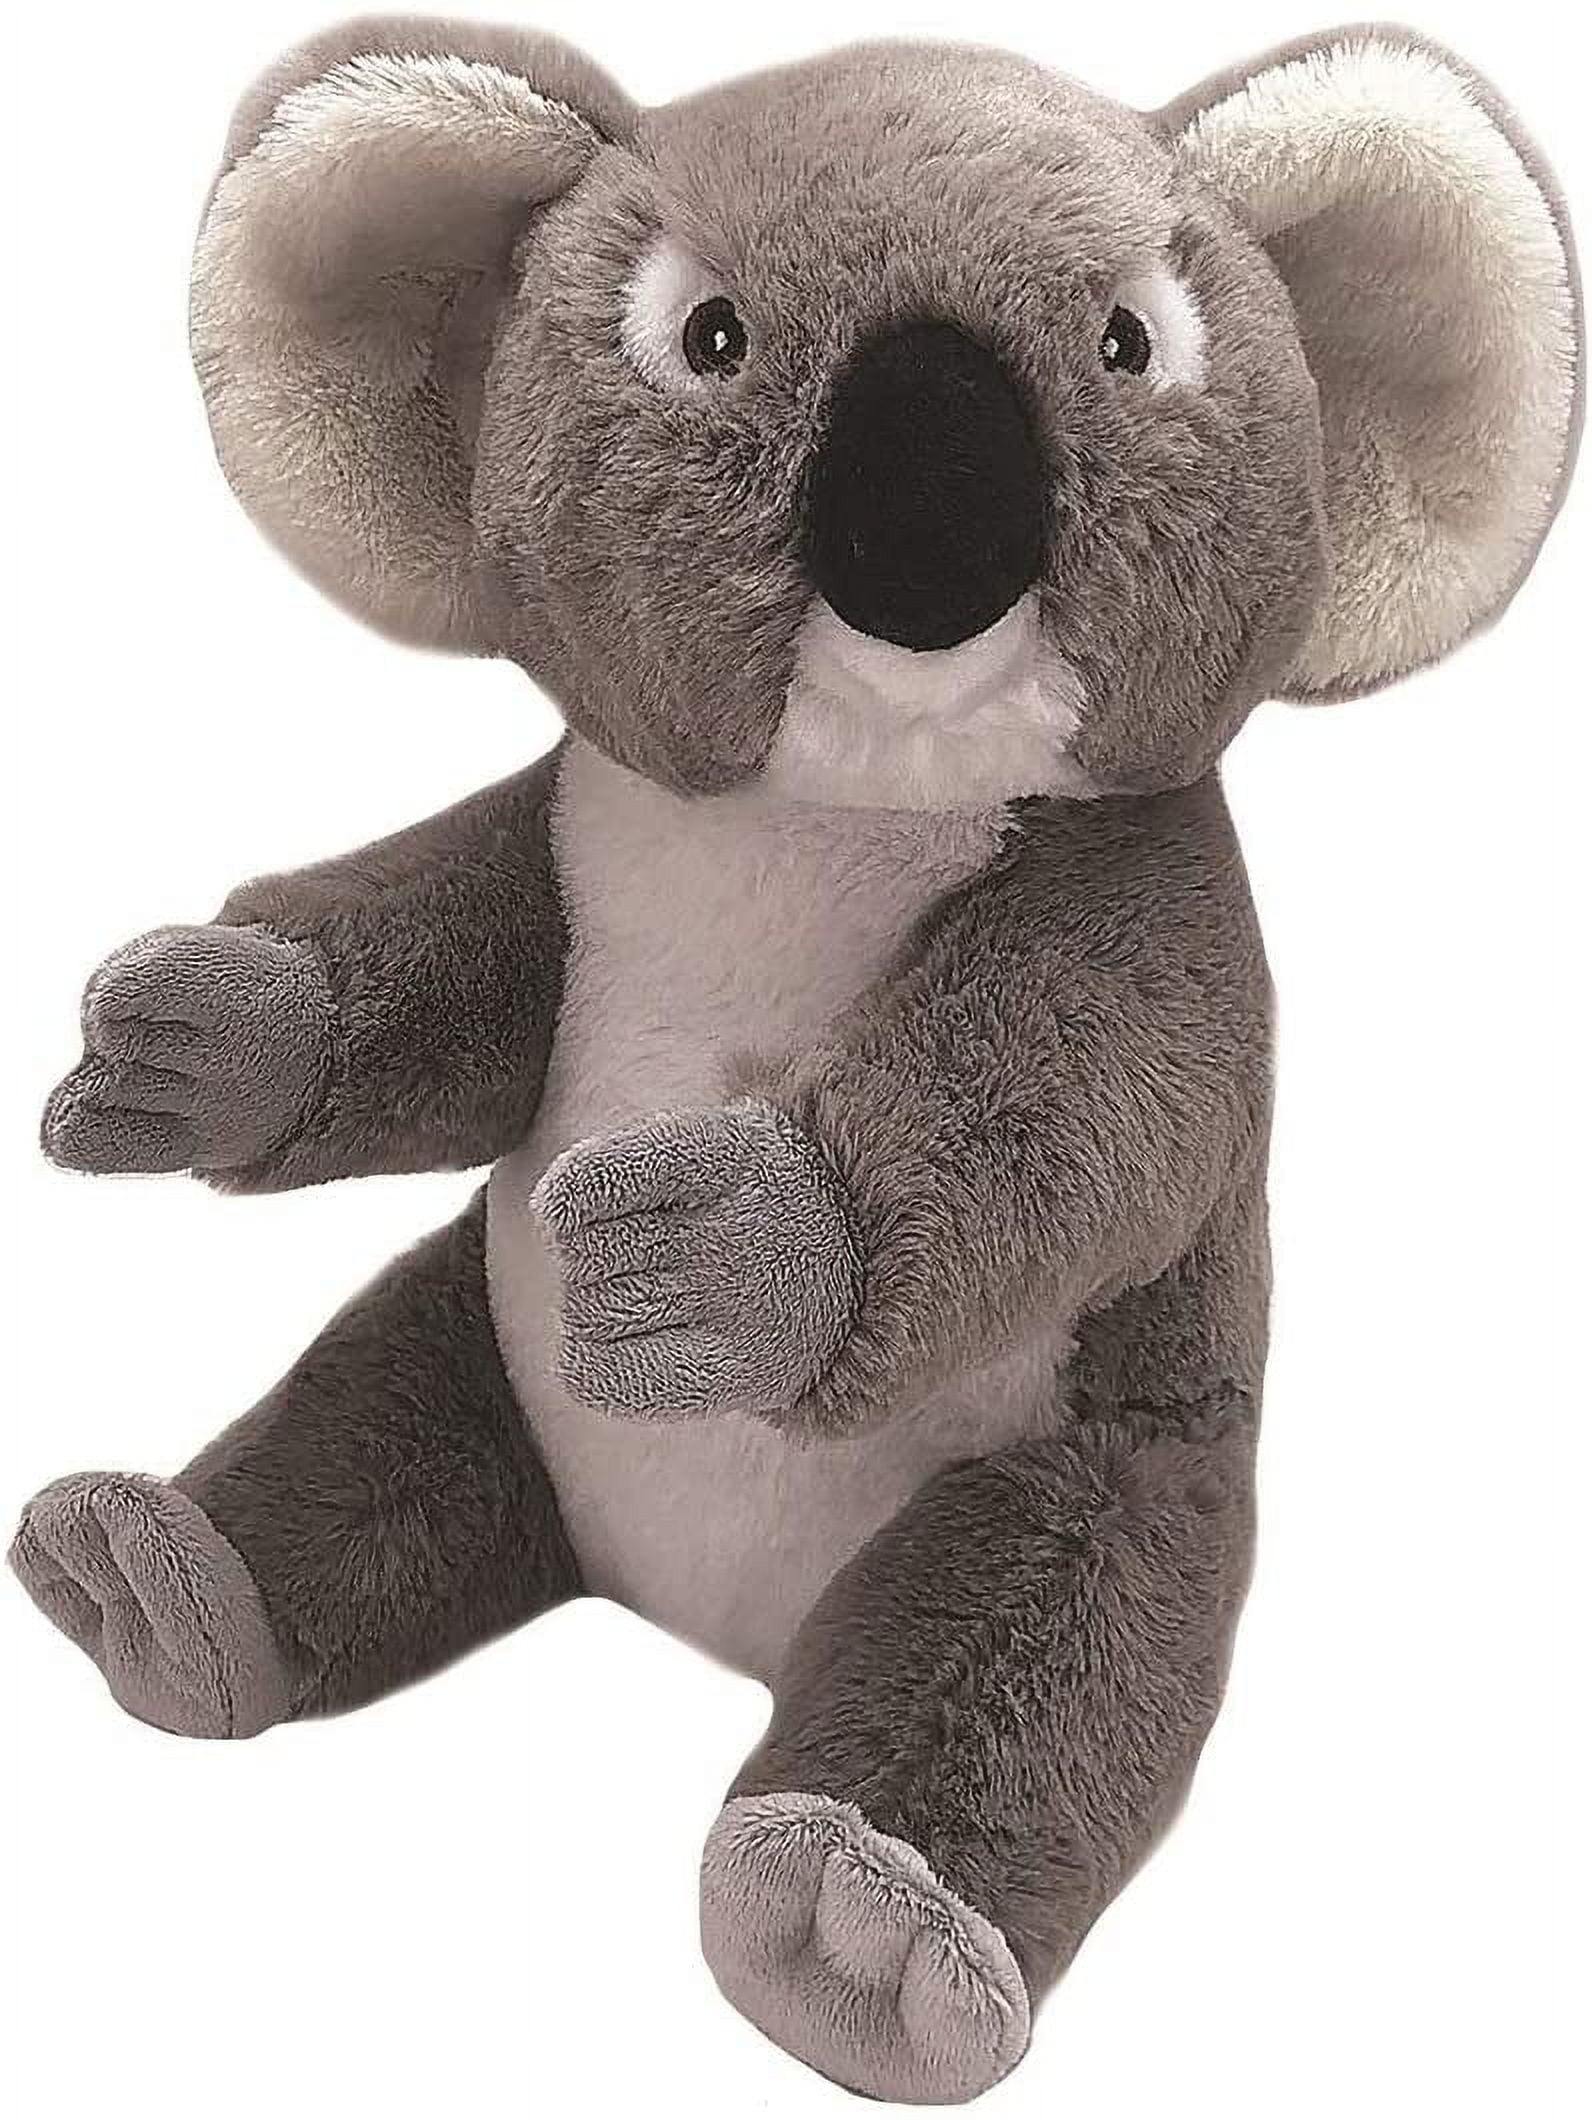 WILD REPUBLIC EcoKins Mini Koala Stuffed Animal 8 inch, Eco Friendly Gifts  for Kids, Plush Toy, Handcrafted Using 7 Recycled Plastic Water Bottles